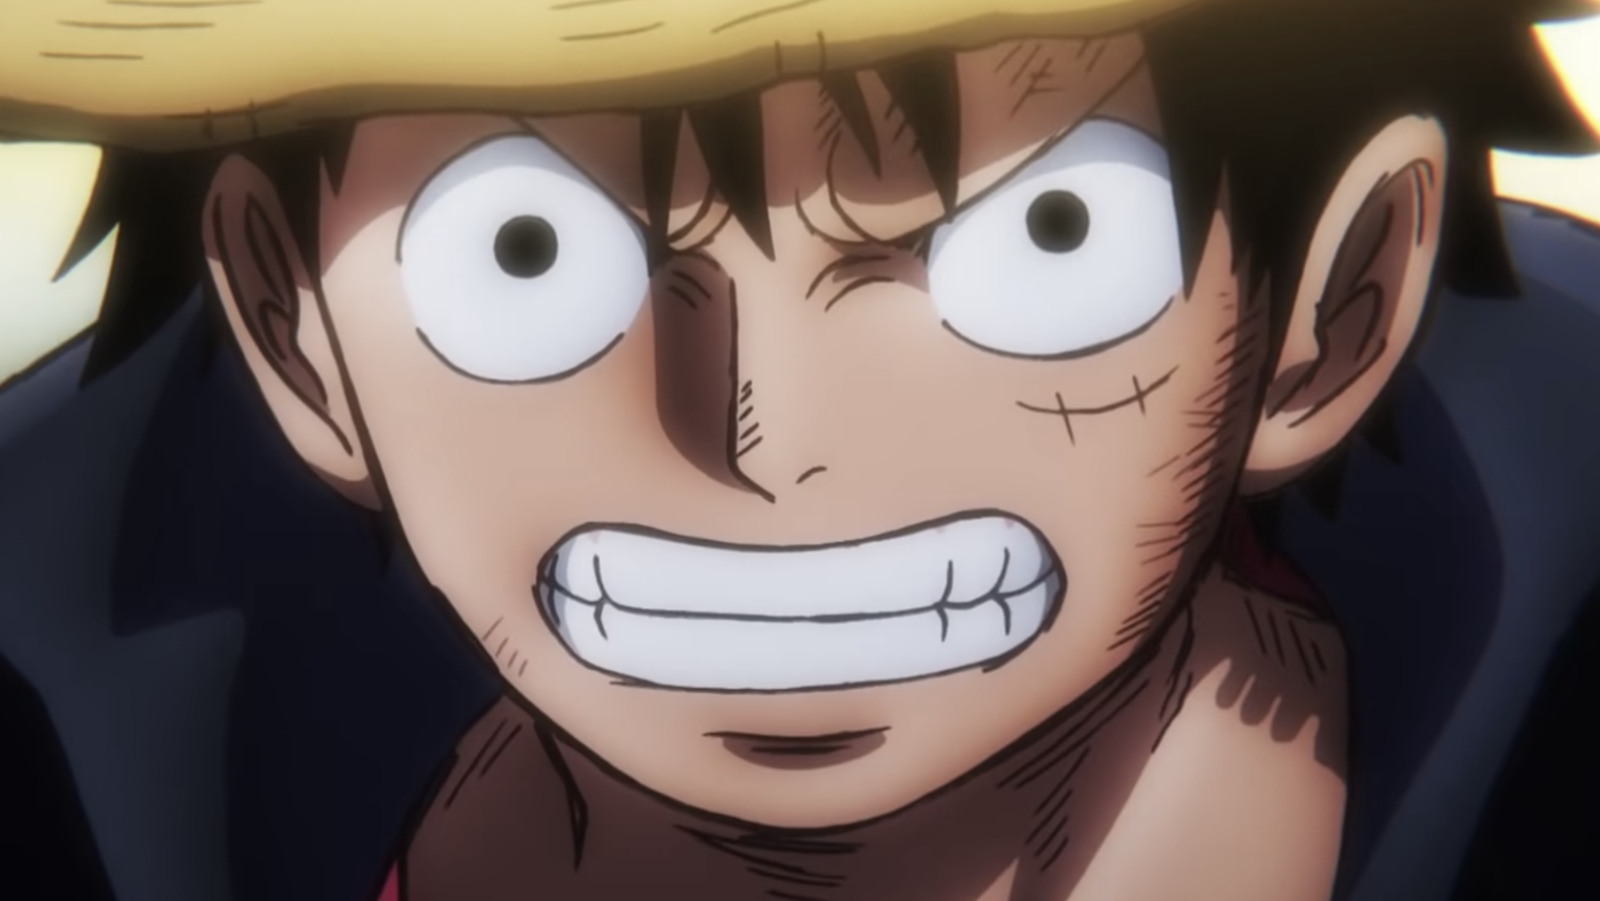 One Piece Creator Eiichiro Oda Has Been Dreaming Up The Series' Final Arc  Ever Since He Was A Kid